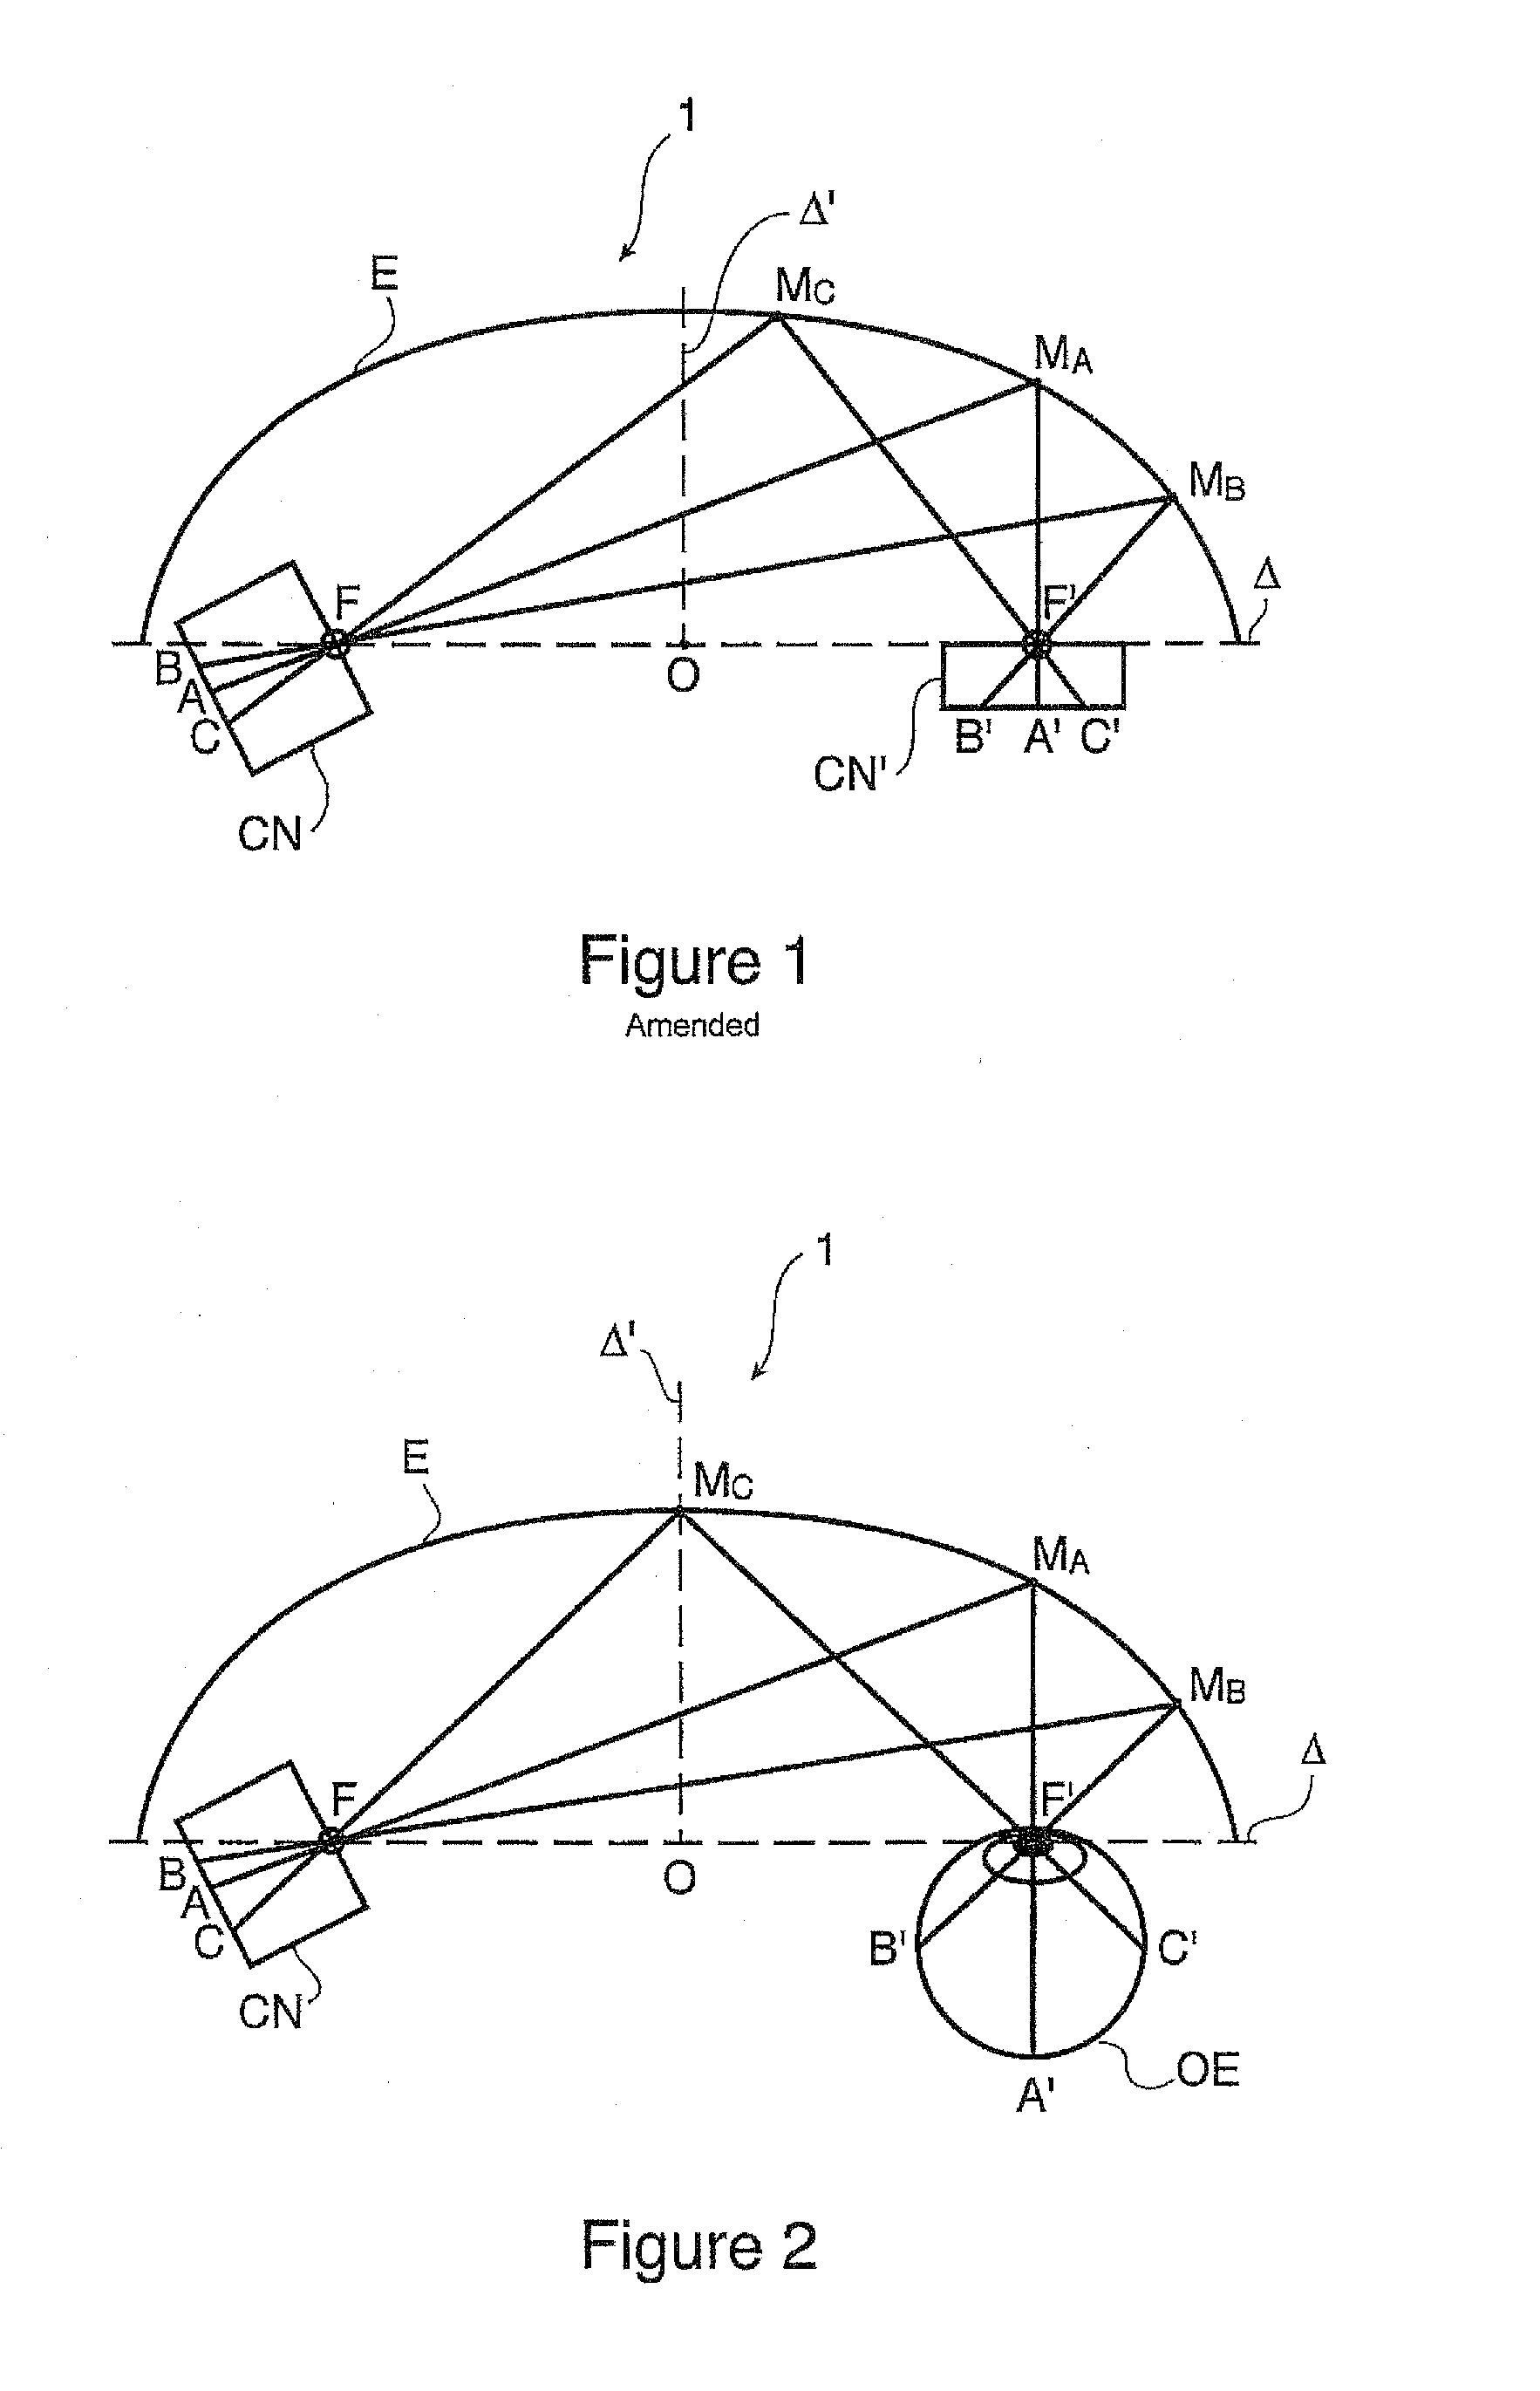 Method and device for generating retinal images using the stigmatism of the two foci of a substantially elliptical sight